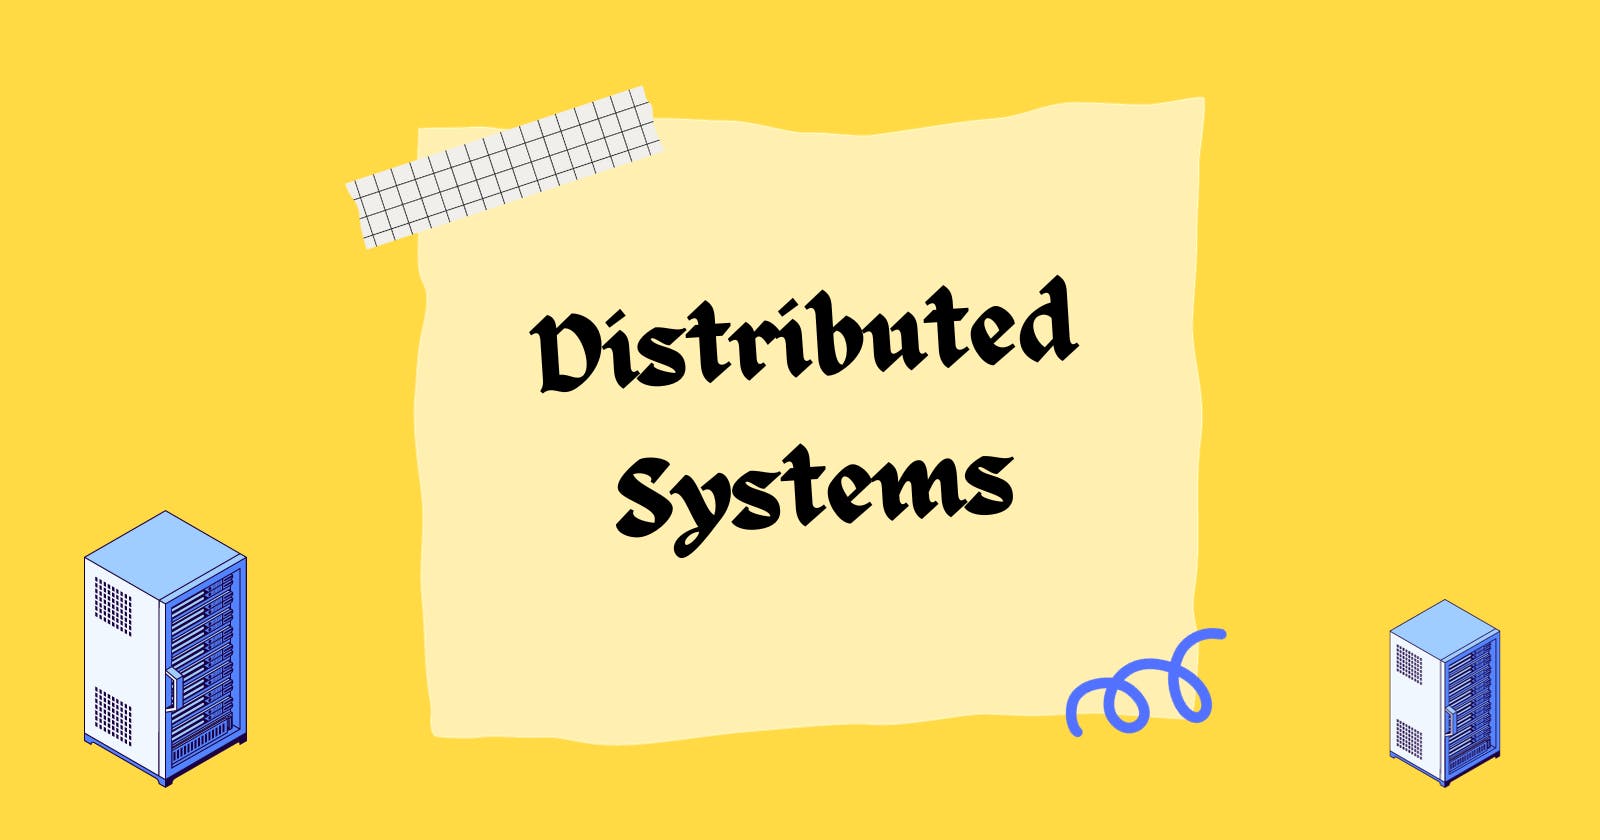 Distributed Systems: Consistency & Replication